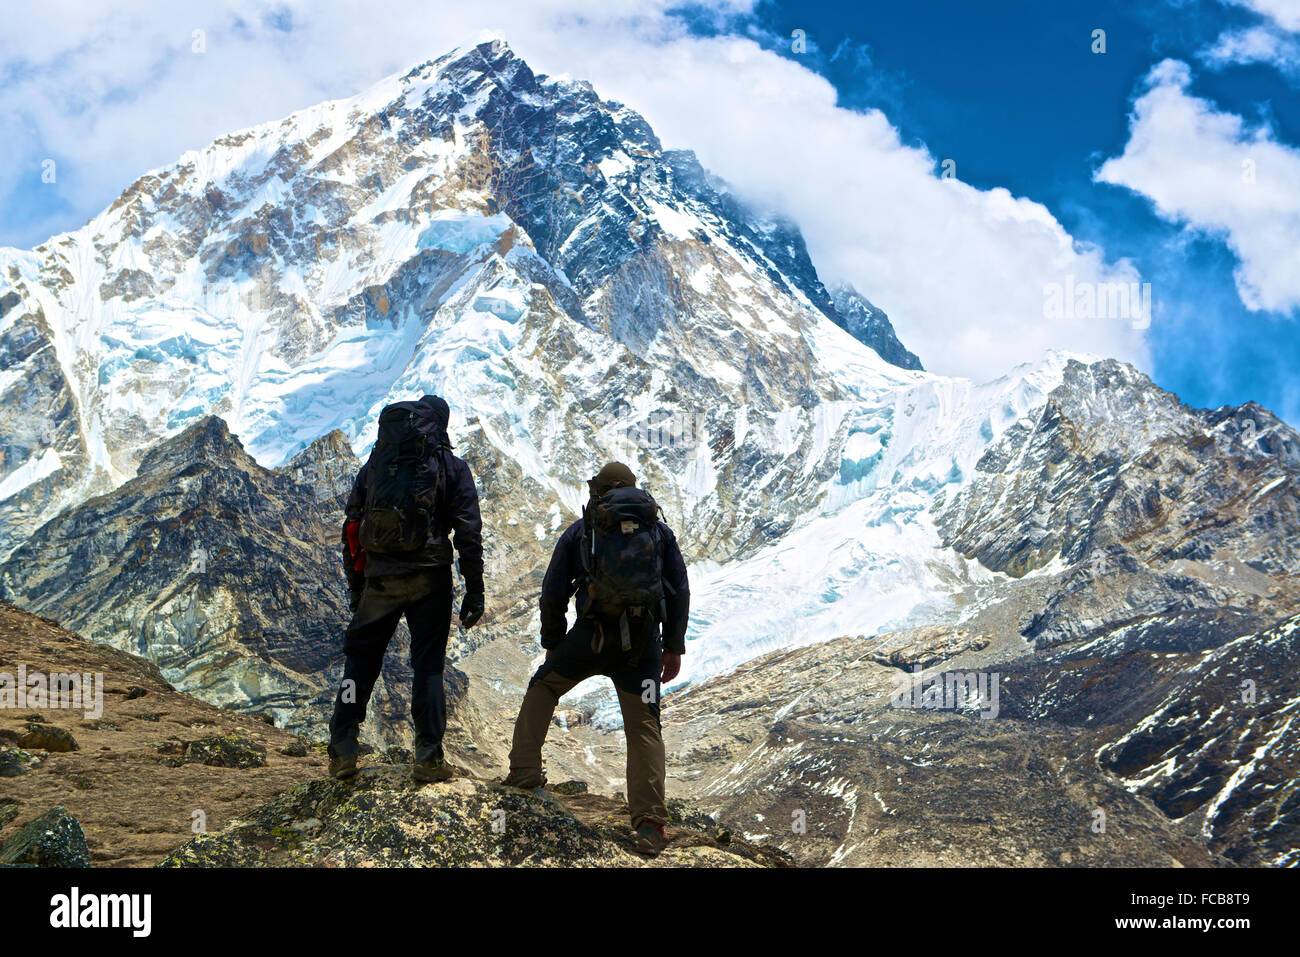 Two mountaineers face Ama Dablam in the Nepal Himalayas on their way to Mount Everest Base Camp Stock Photo